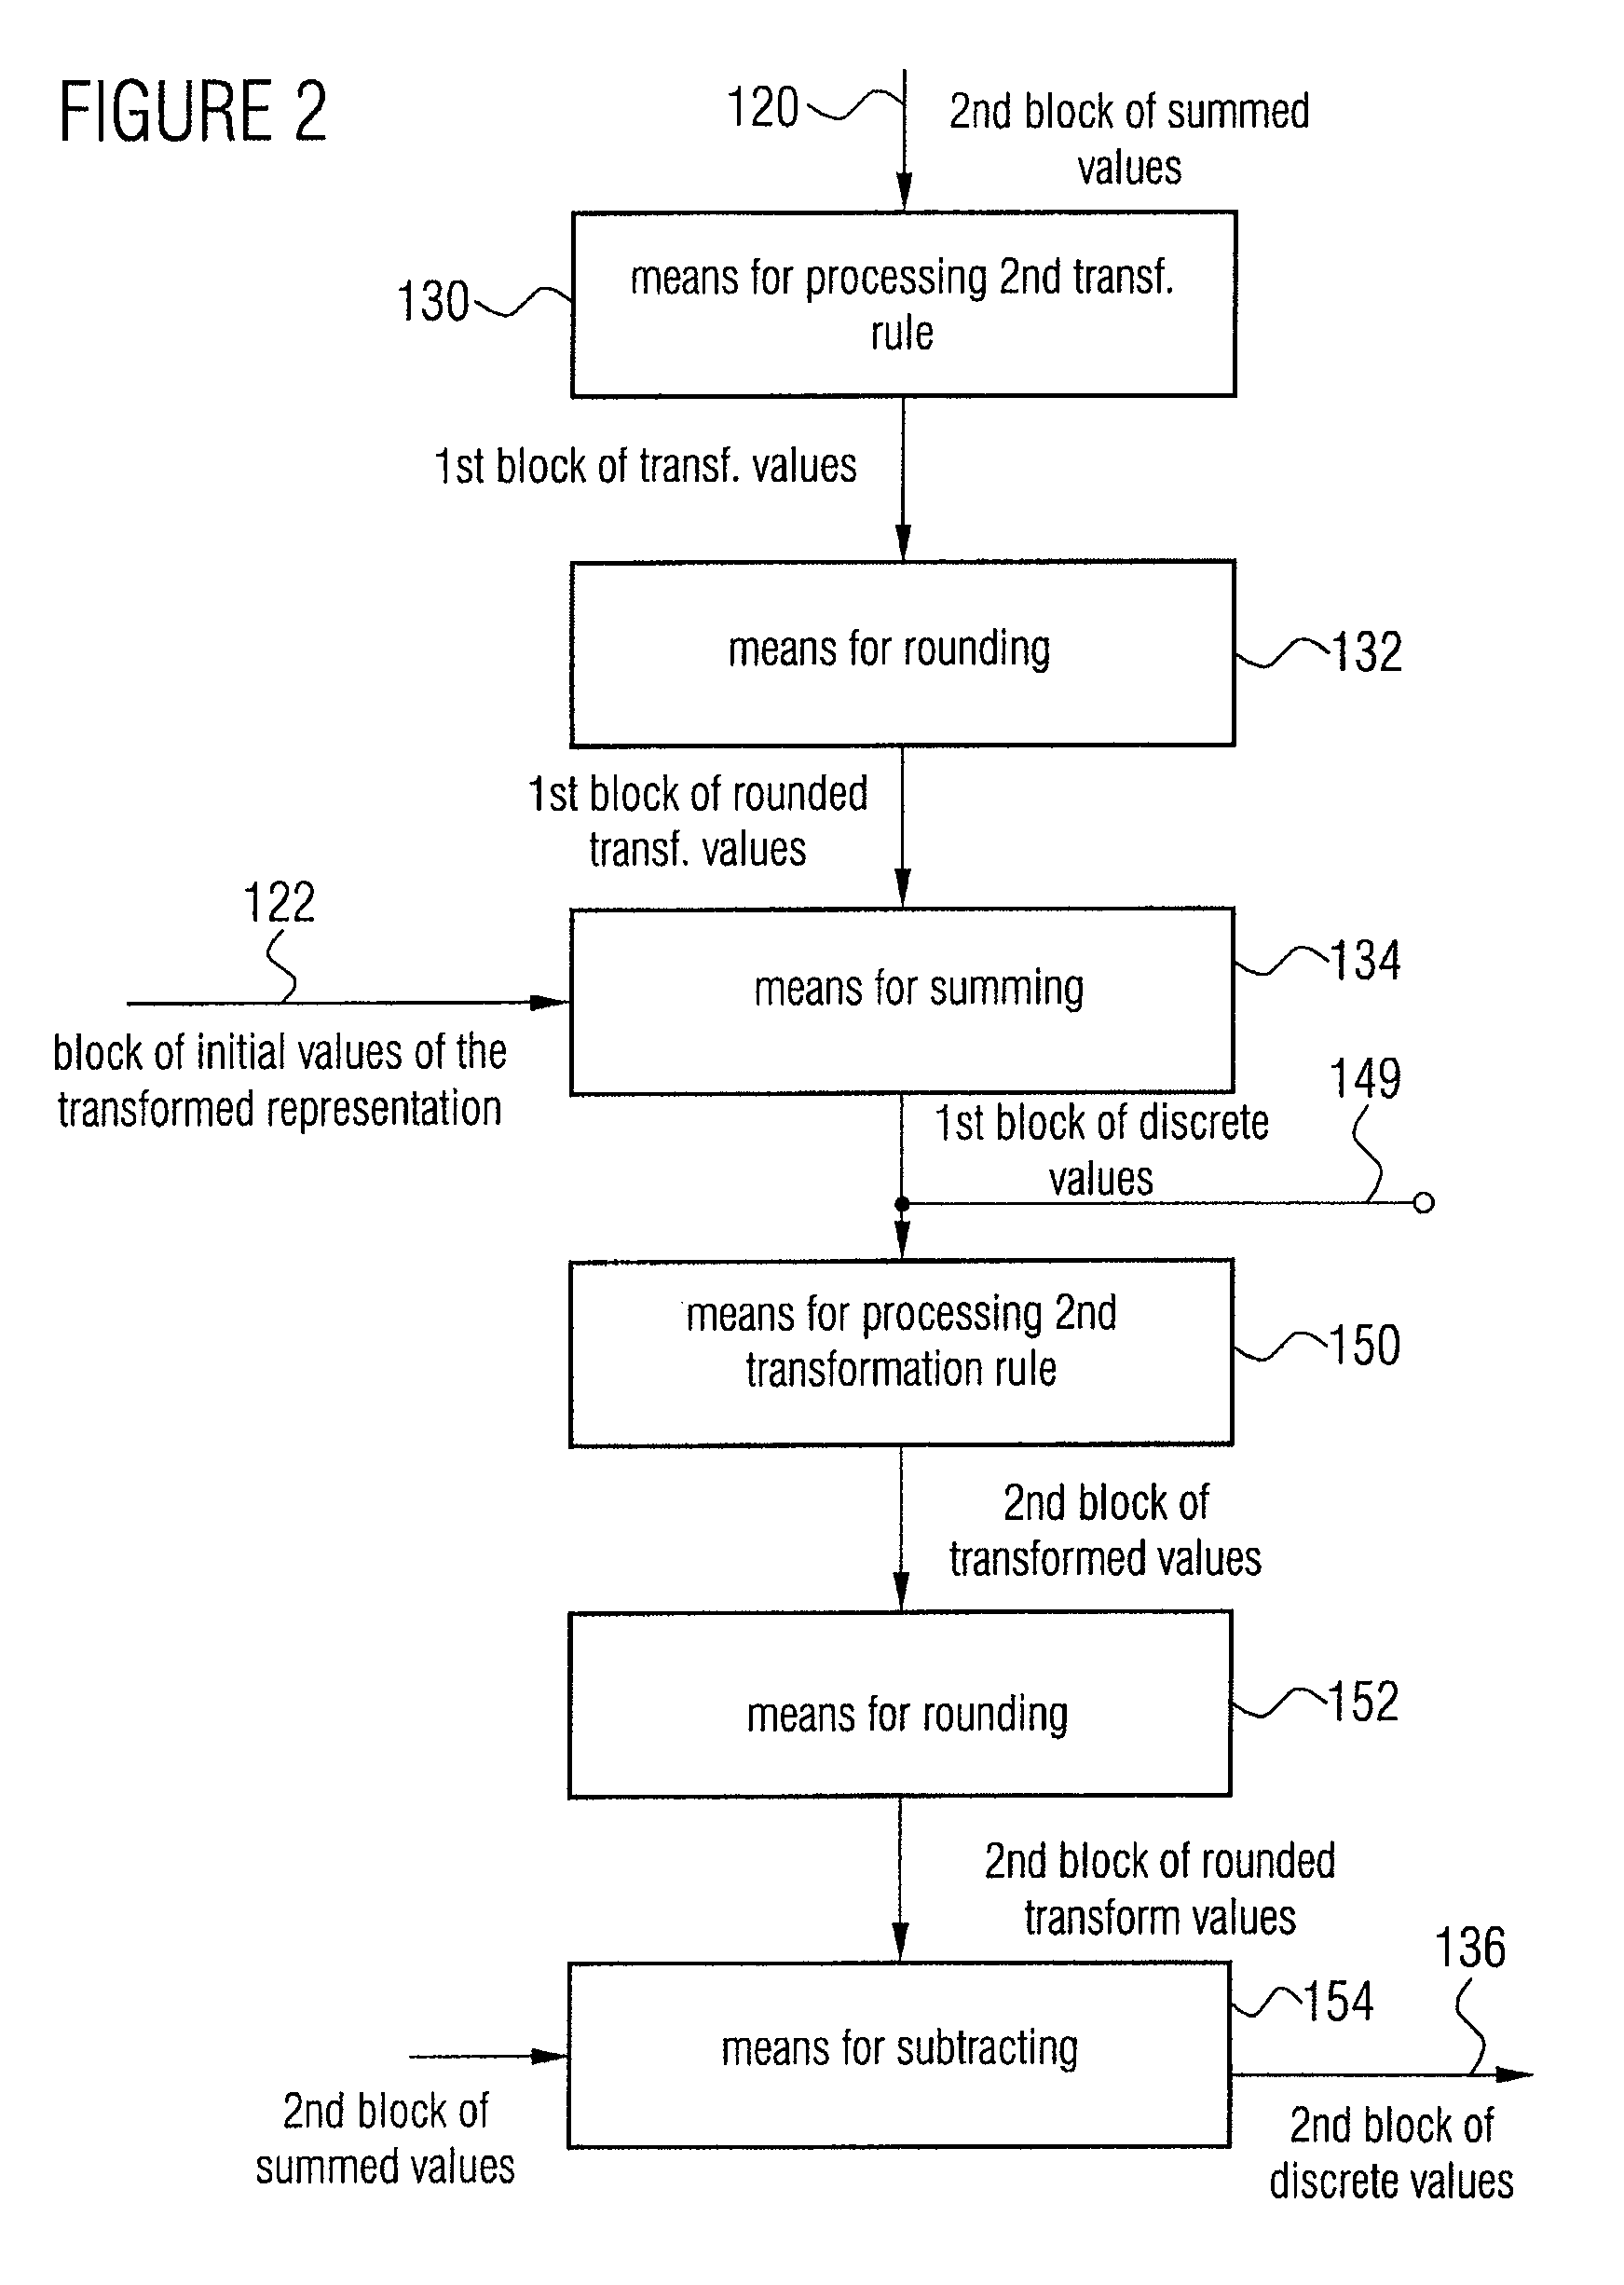 Apparatus and method for conversion into a transformed representation or for inverse conversion of the transformed representation